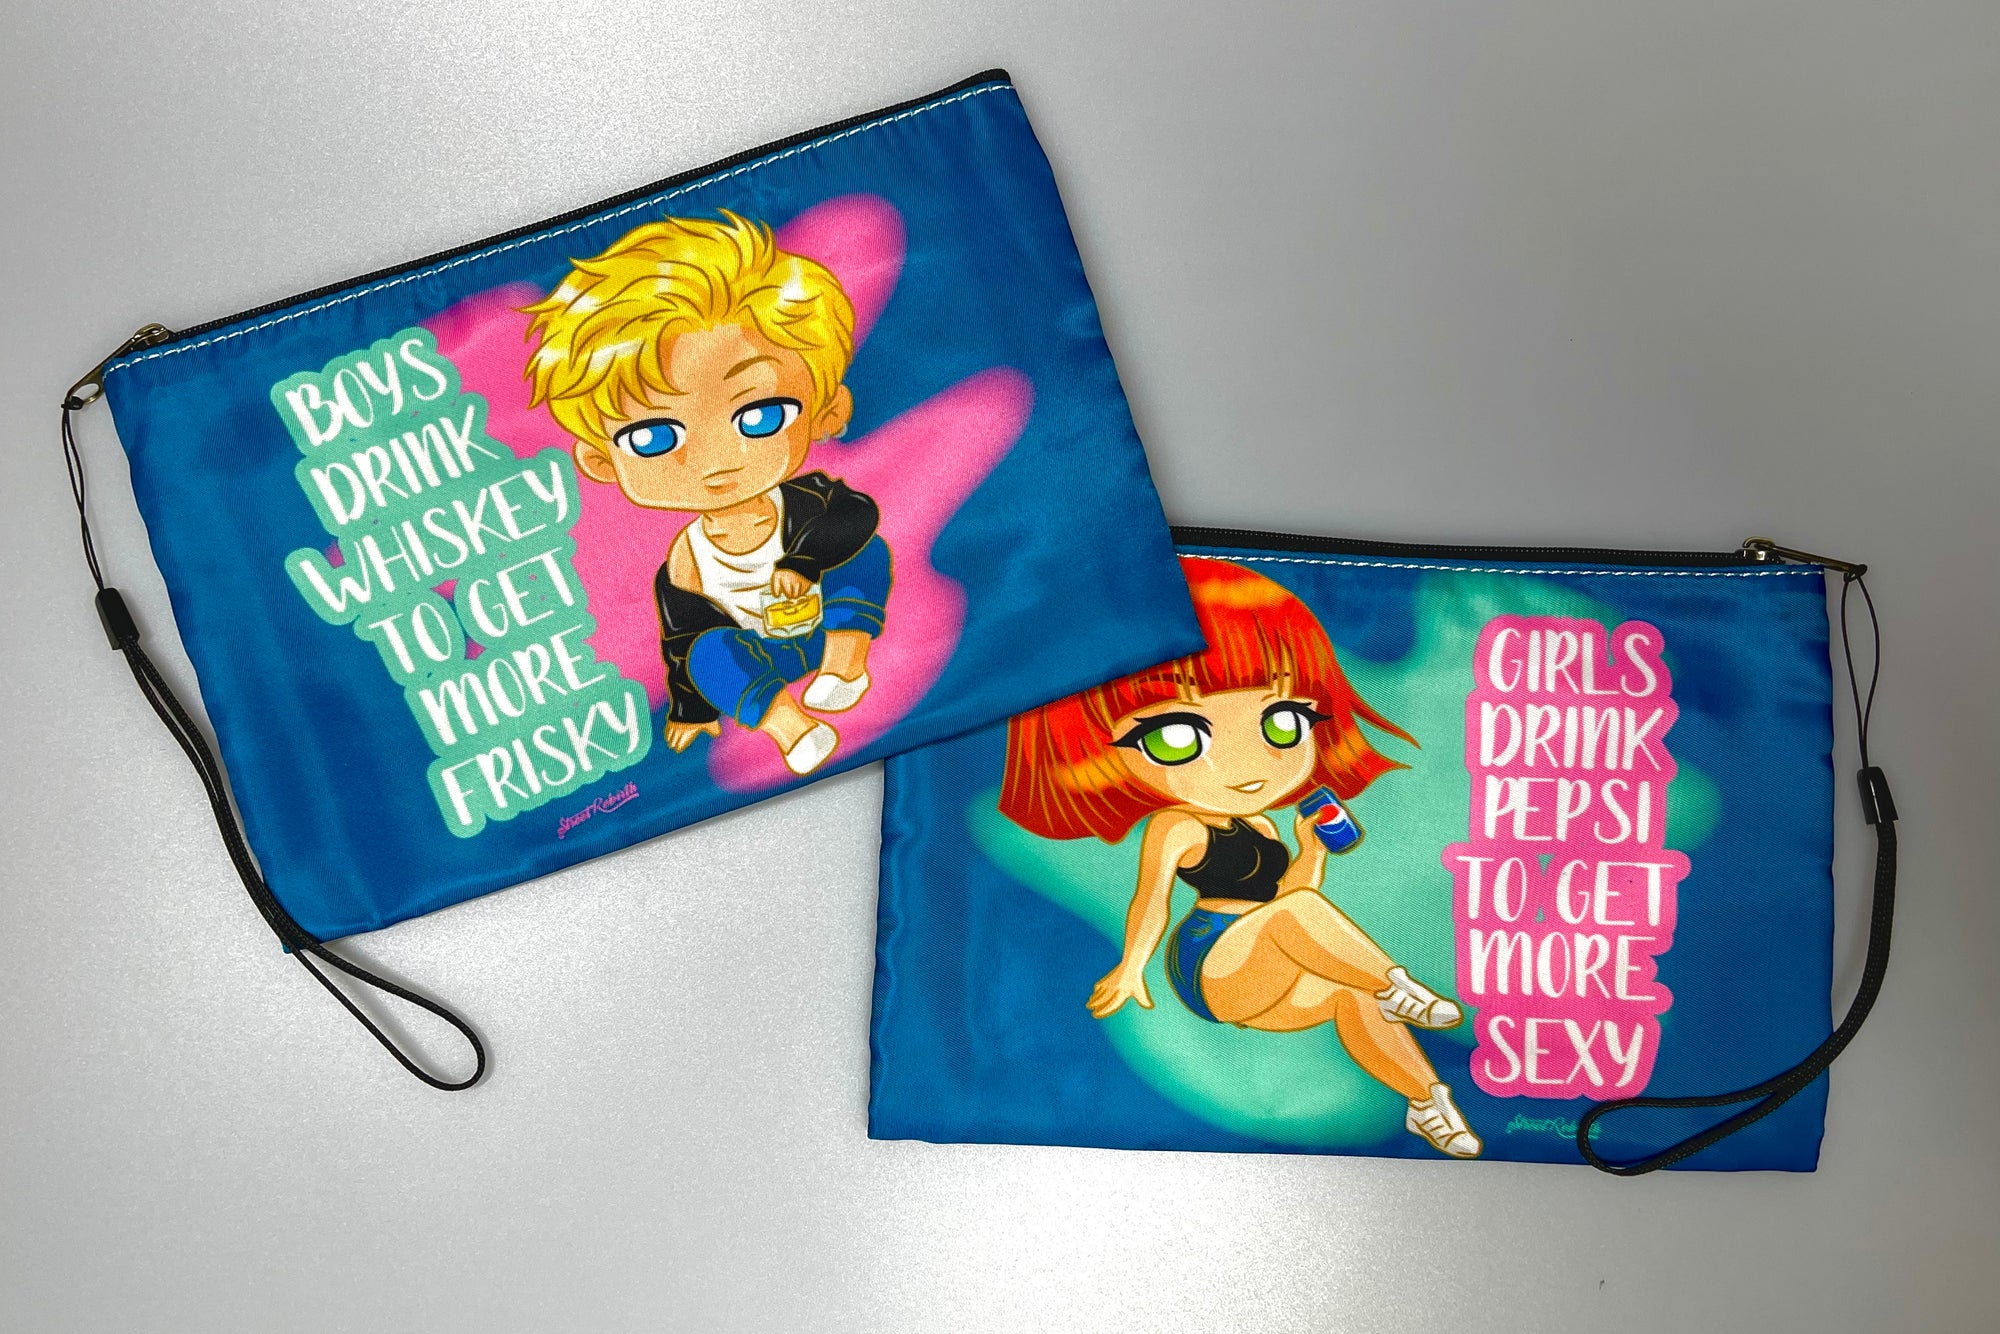 Girls Drink Pepsi Boys Drink Whiskey Clutch Bag - Travel Pocket Wallet For Change And Accessories